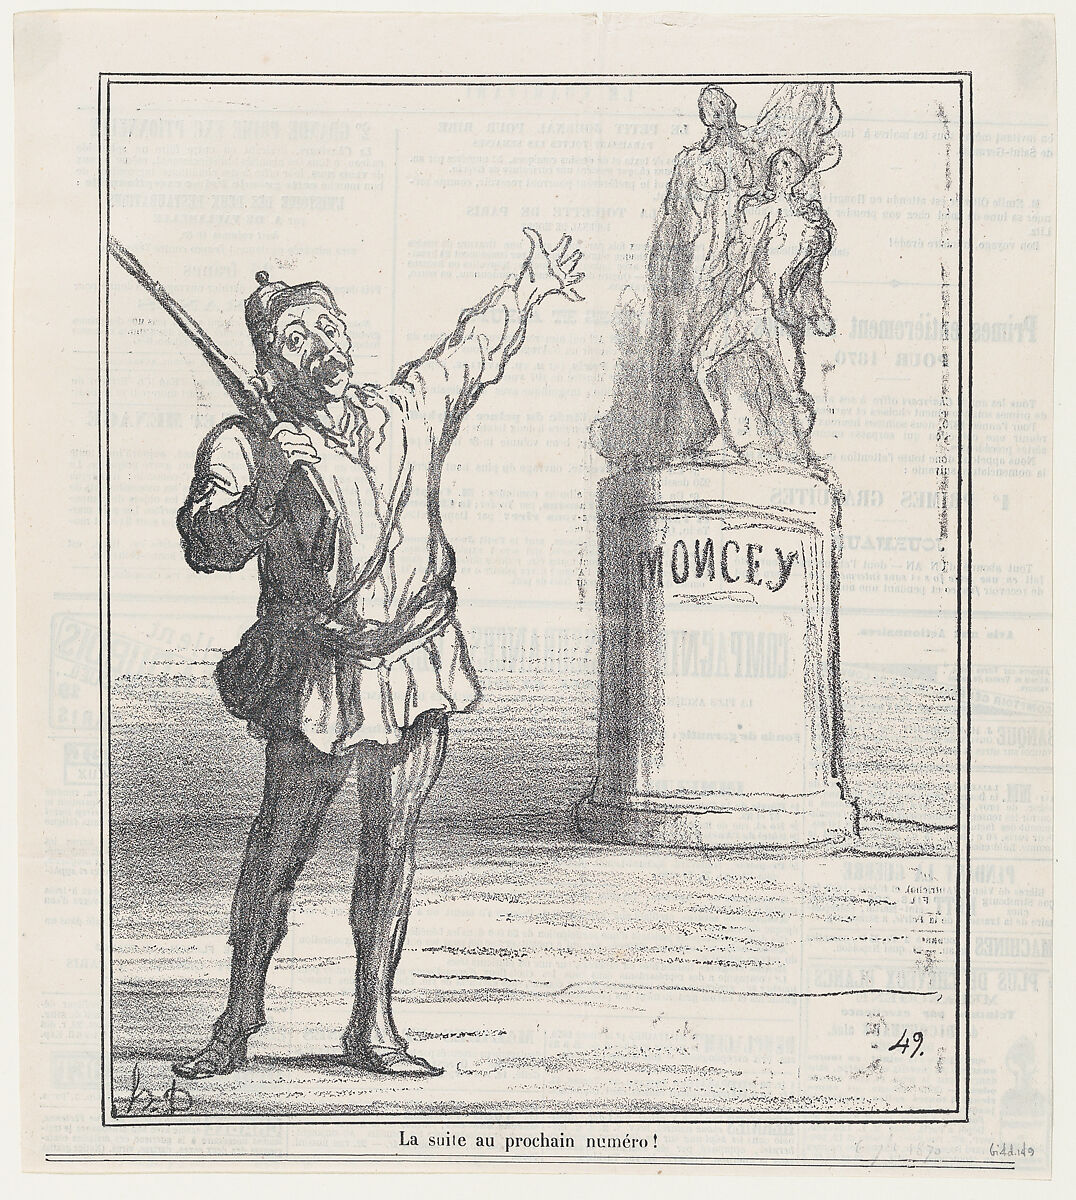 To be followed in the next edition!, from 'News of the day,' published in Le Charivari, September 7, 1870, Honoré Daumier (French, Marseilles 1808–1879 Valmondois), Lithograph on newsprint; second state of two (Delteil) 